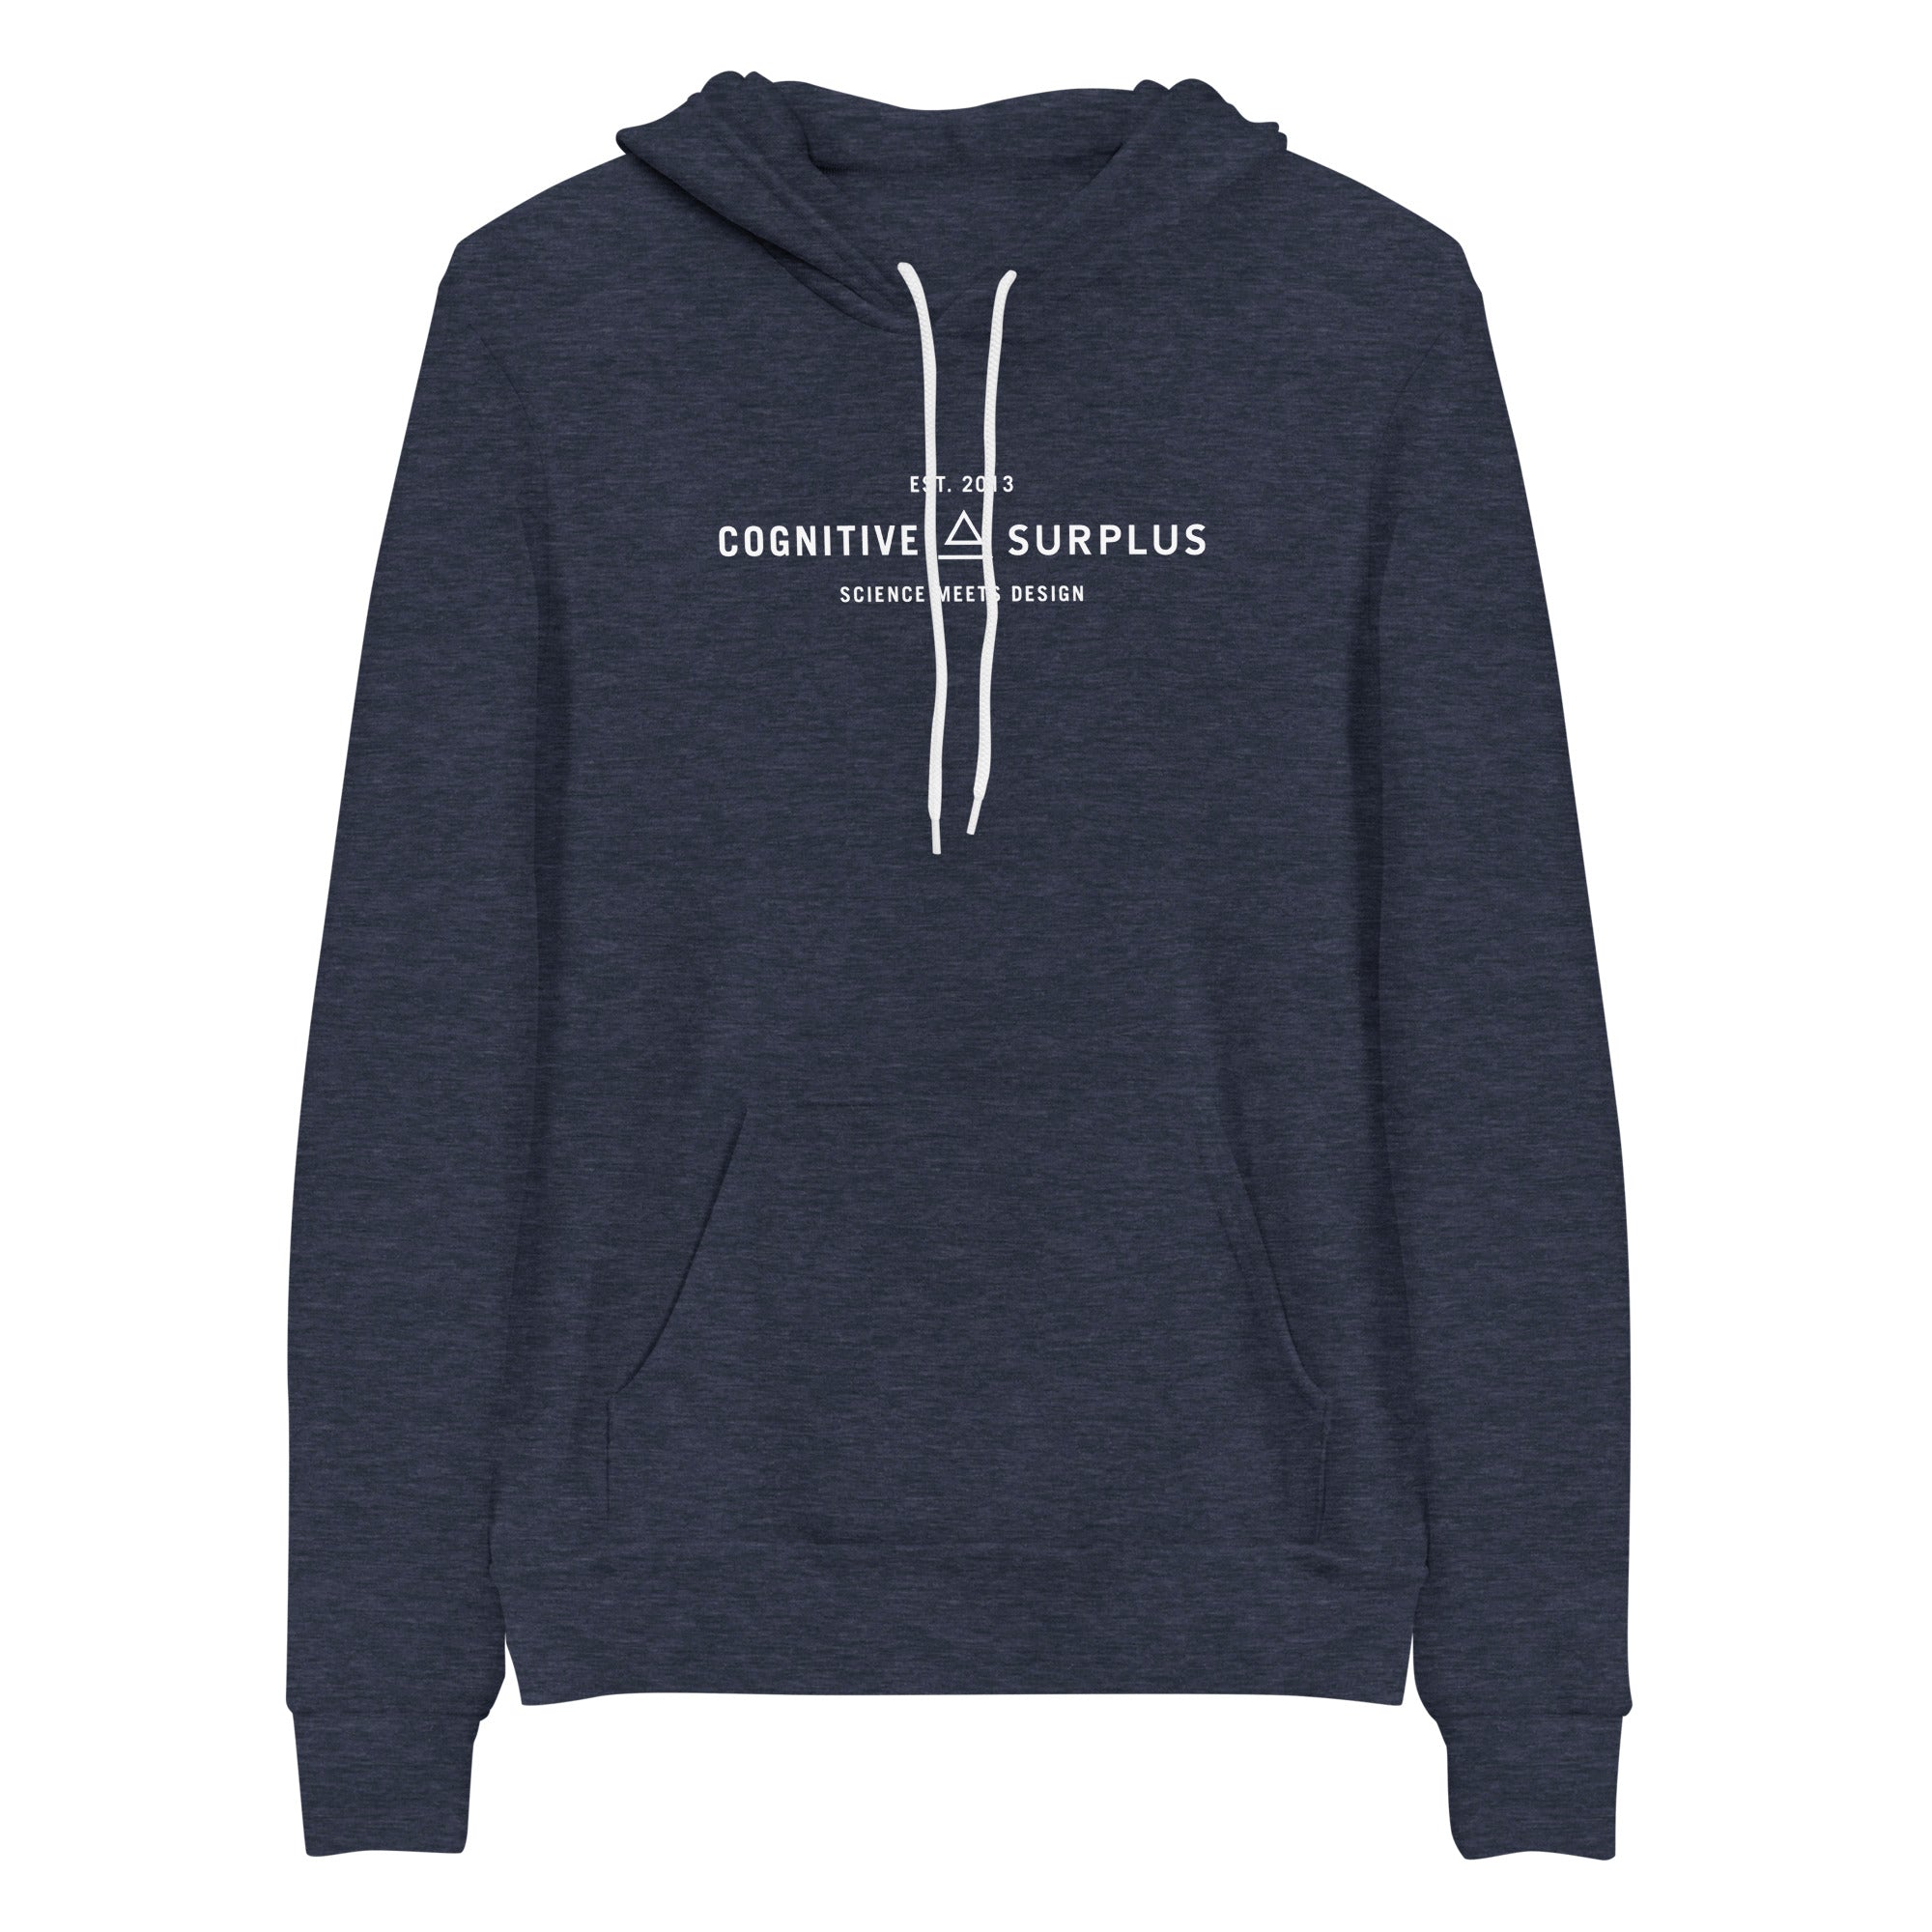 unisex-pullover-hoodie-heather-navy-front-656e6e43a4ee1.jpg